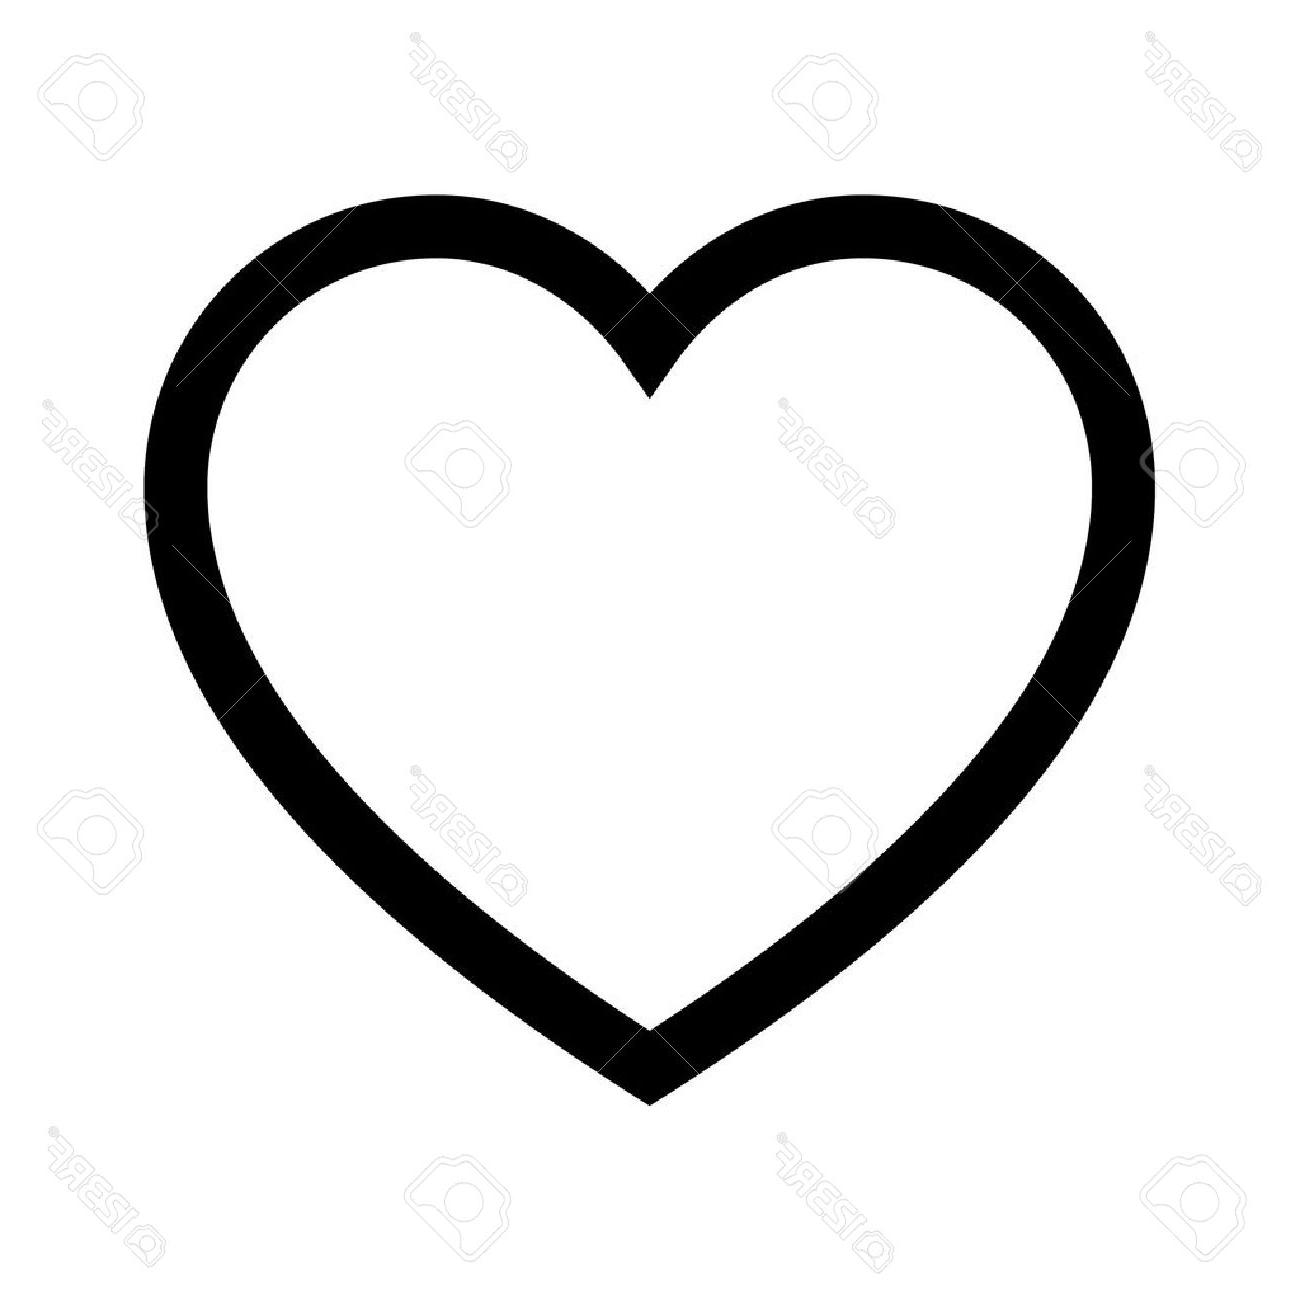 Download Heart Outline Vector at Vectorified.com | Collection of ...